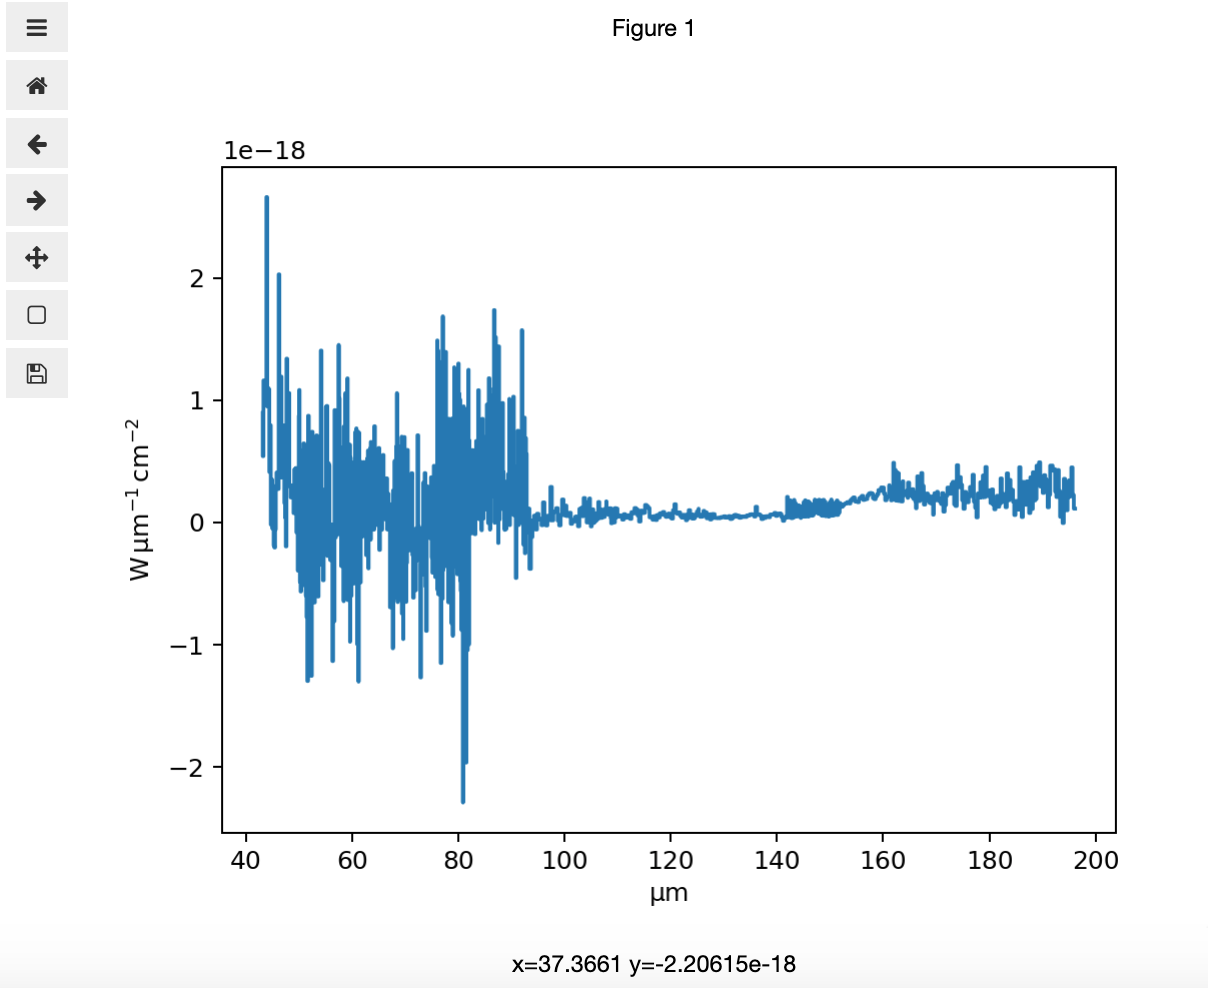 Dynamic exploration of ISO spectra in python